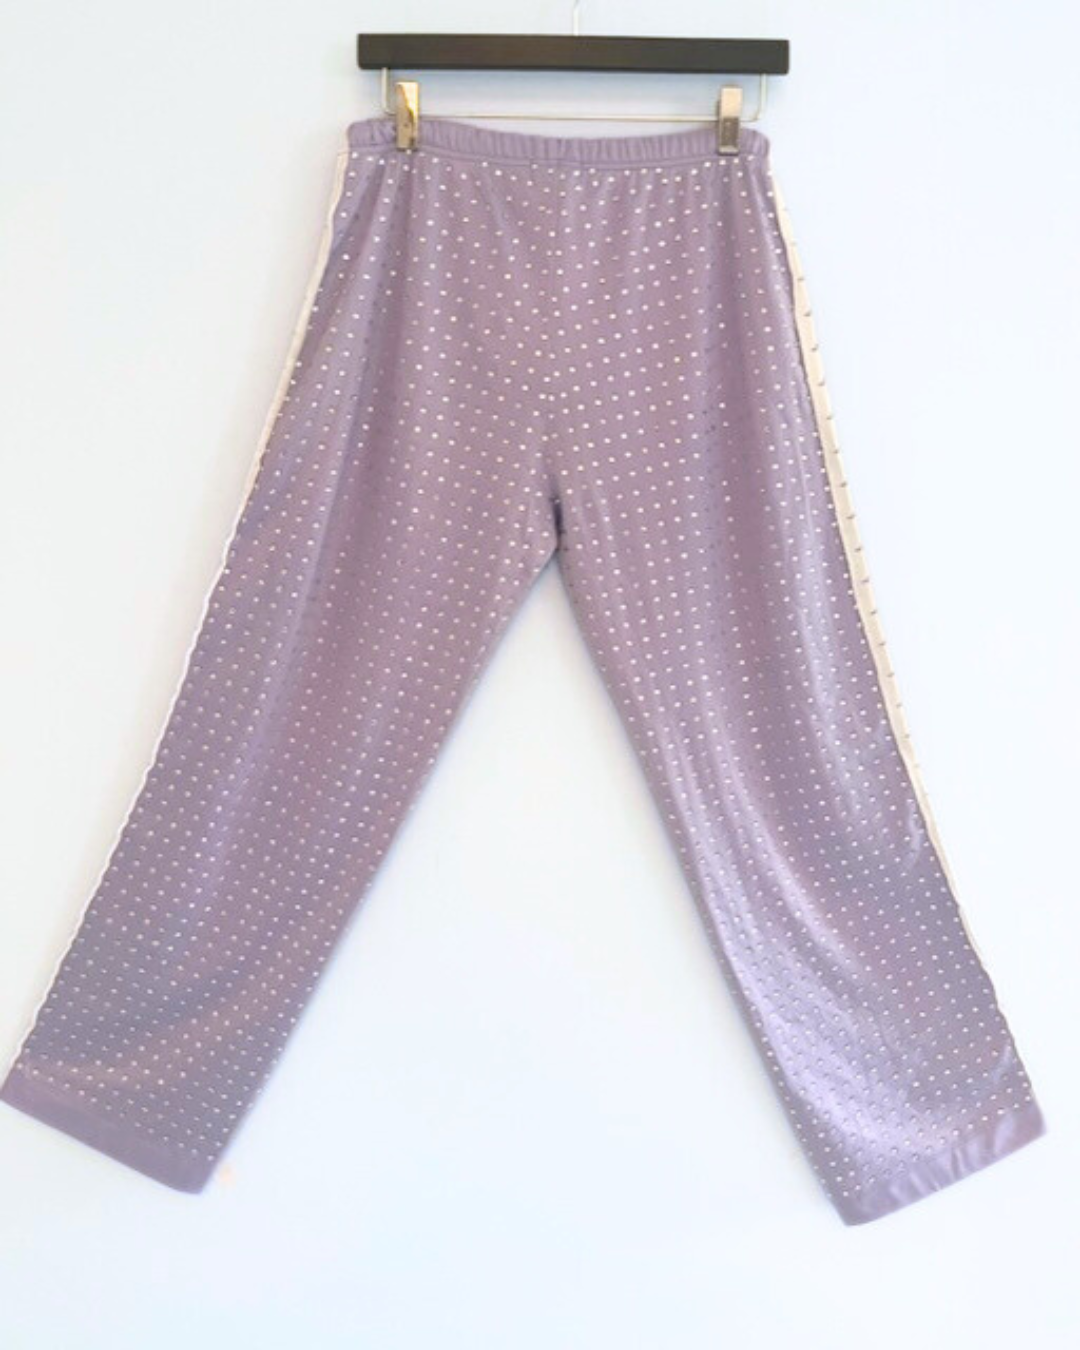 Vintage Lilac / White Stripe KAPPA Tracksuit pants with all over diamante studs